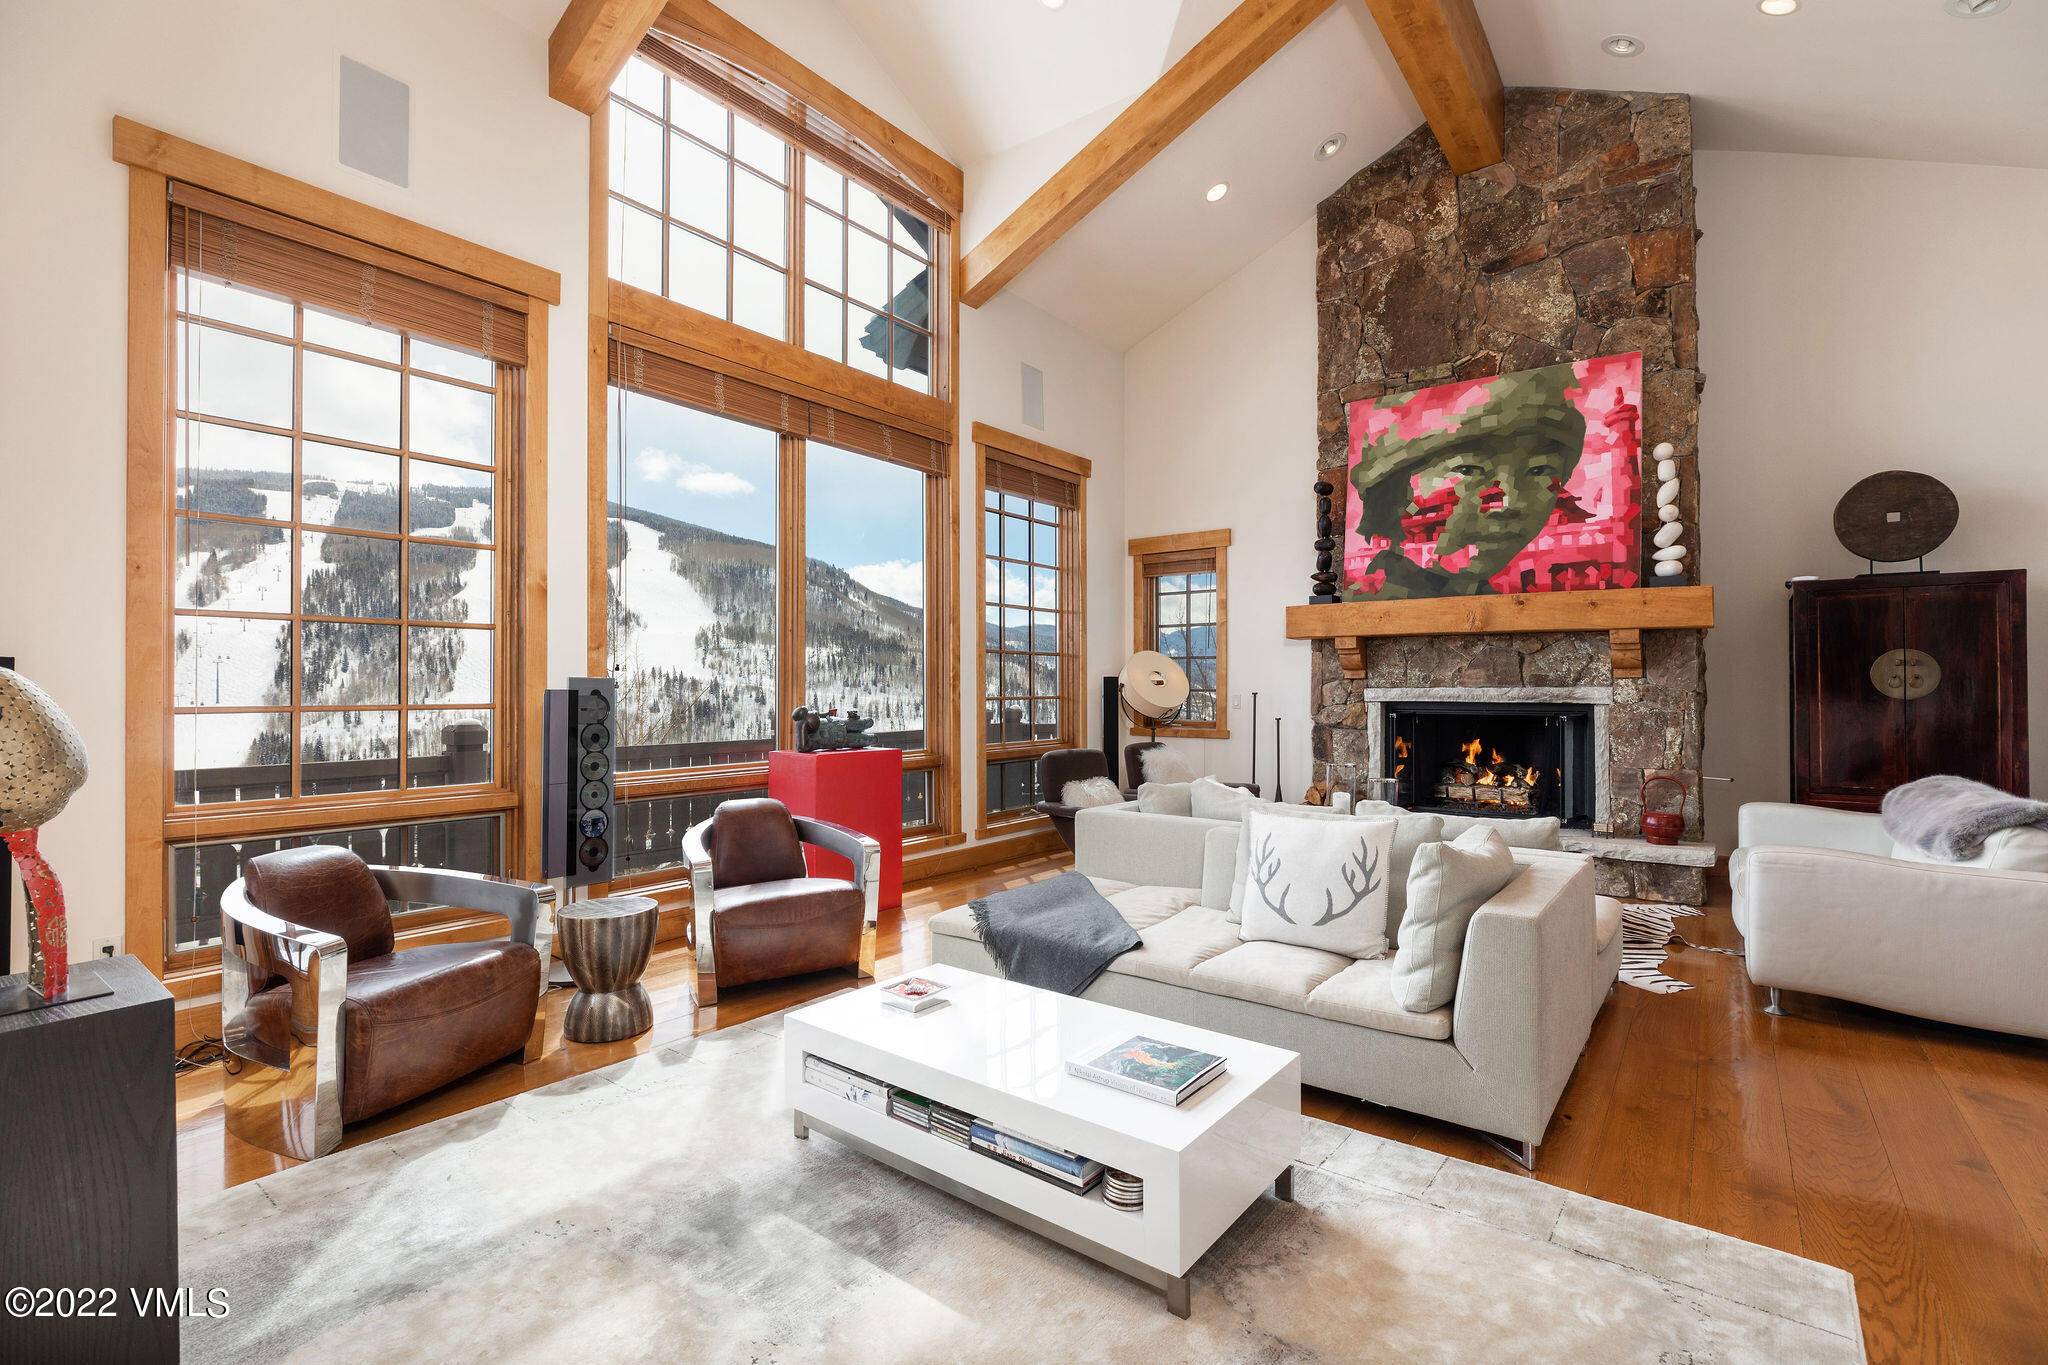 Come home to one of the most charming residences in the desirable Potato Patch neighborhood with birds eye views of Vail Mountain.